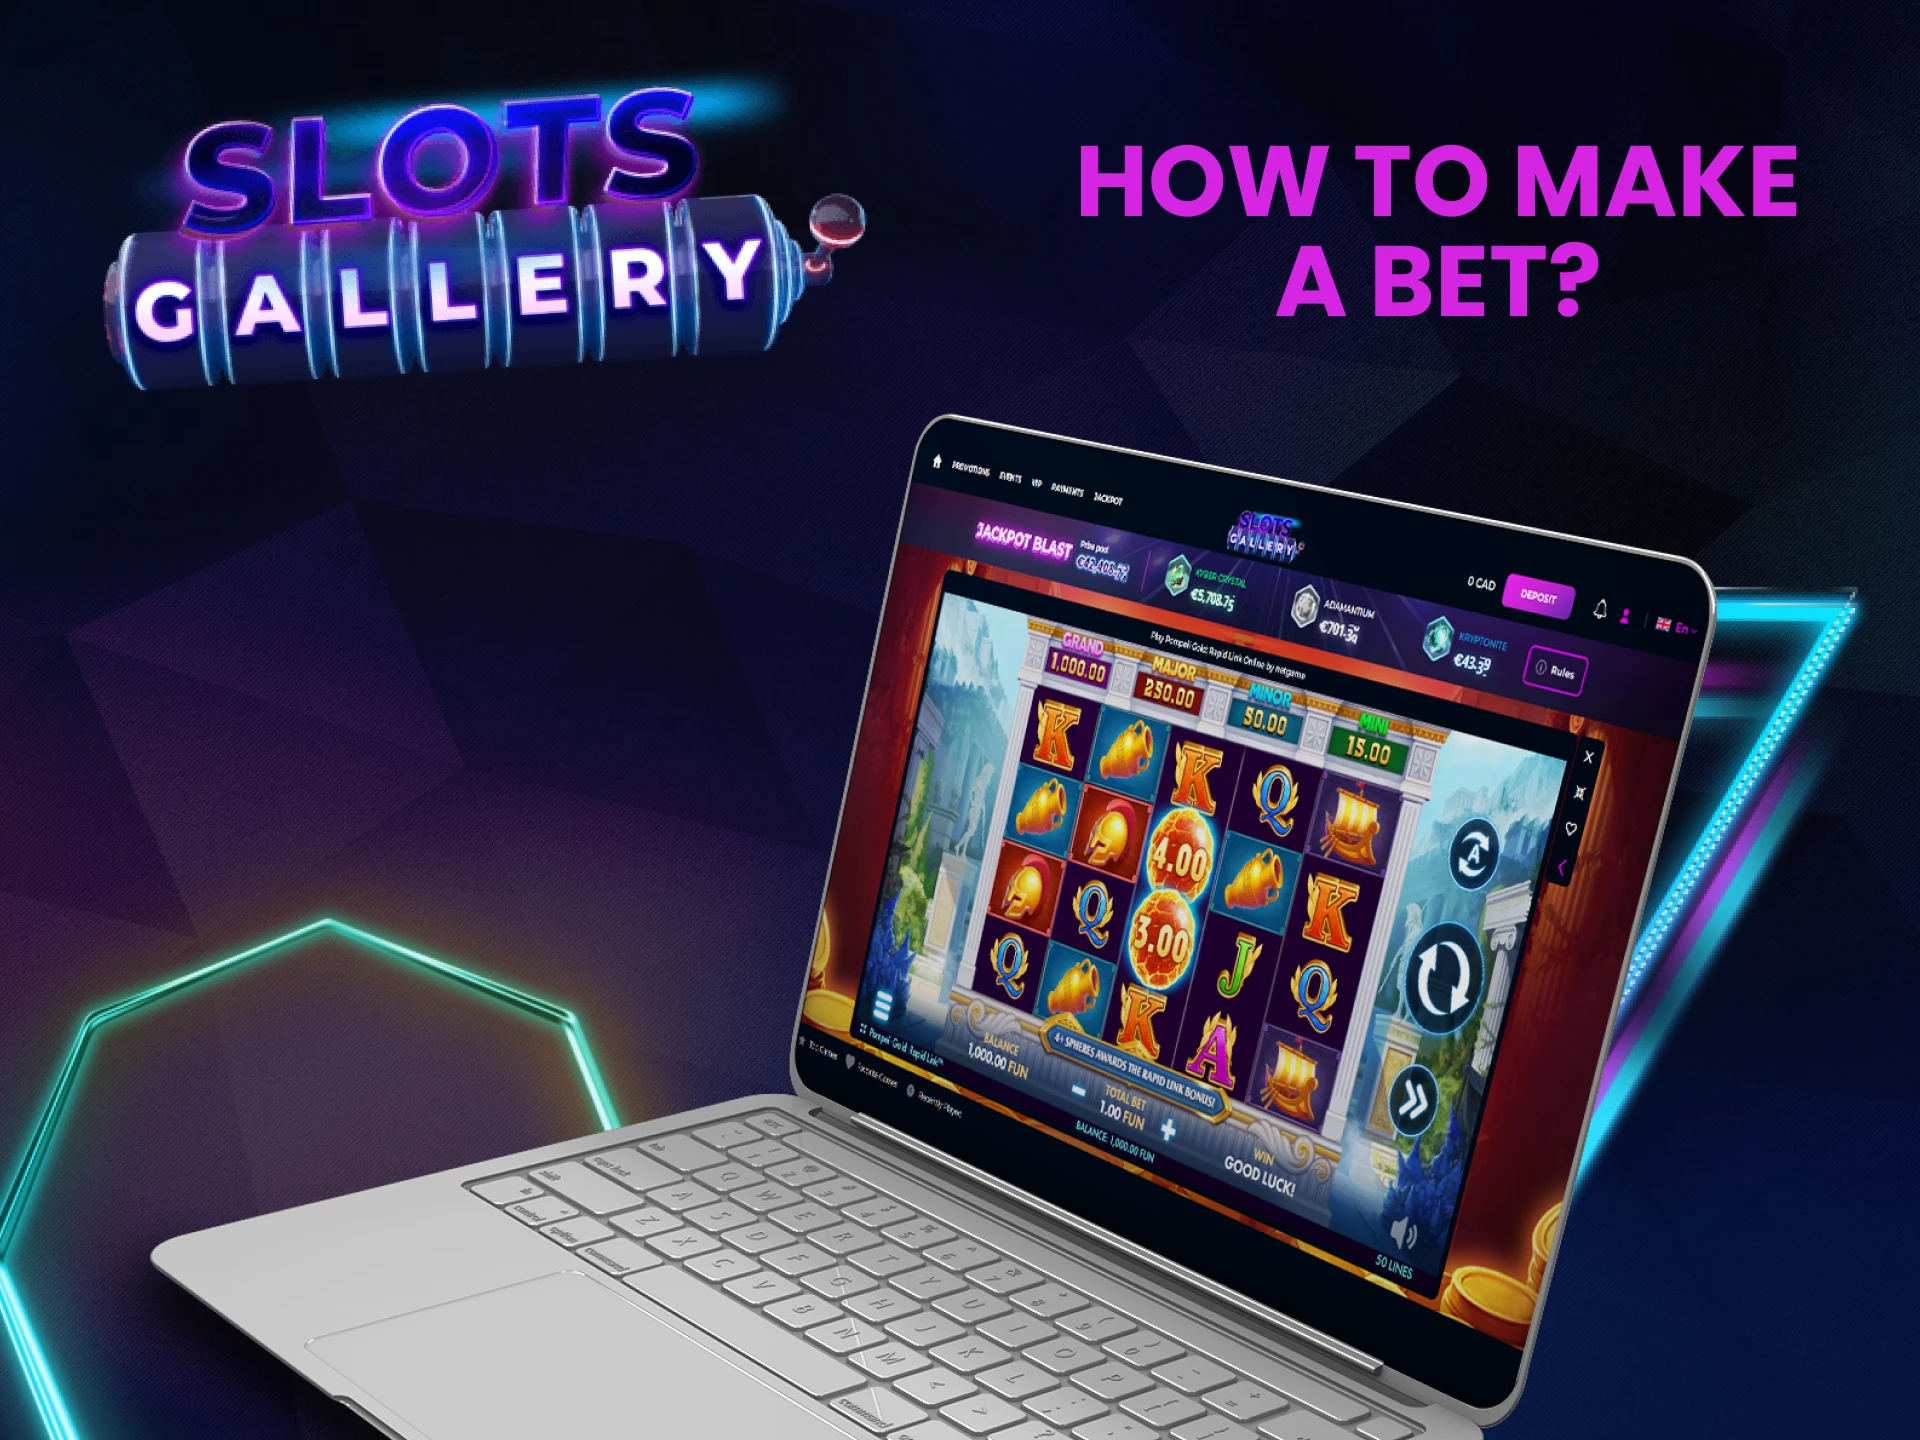 We will show you how to start playing on Slots Gallery.